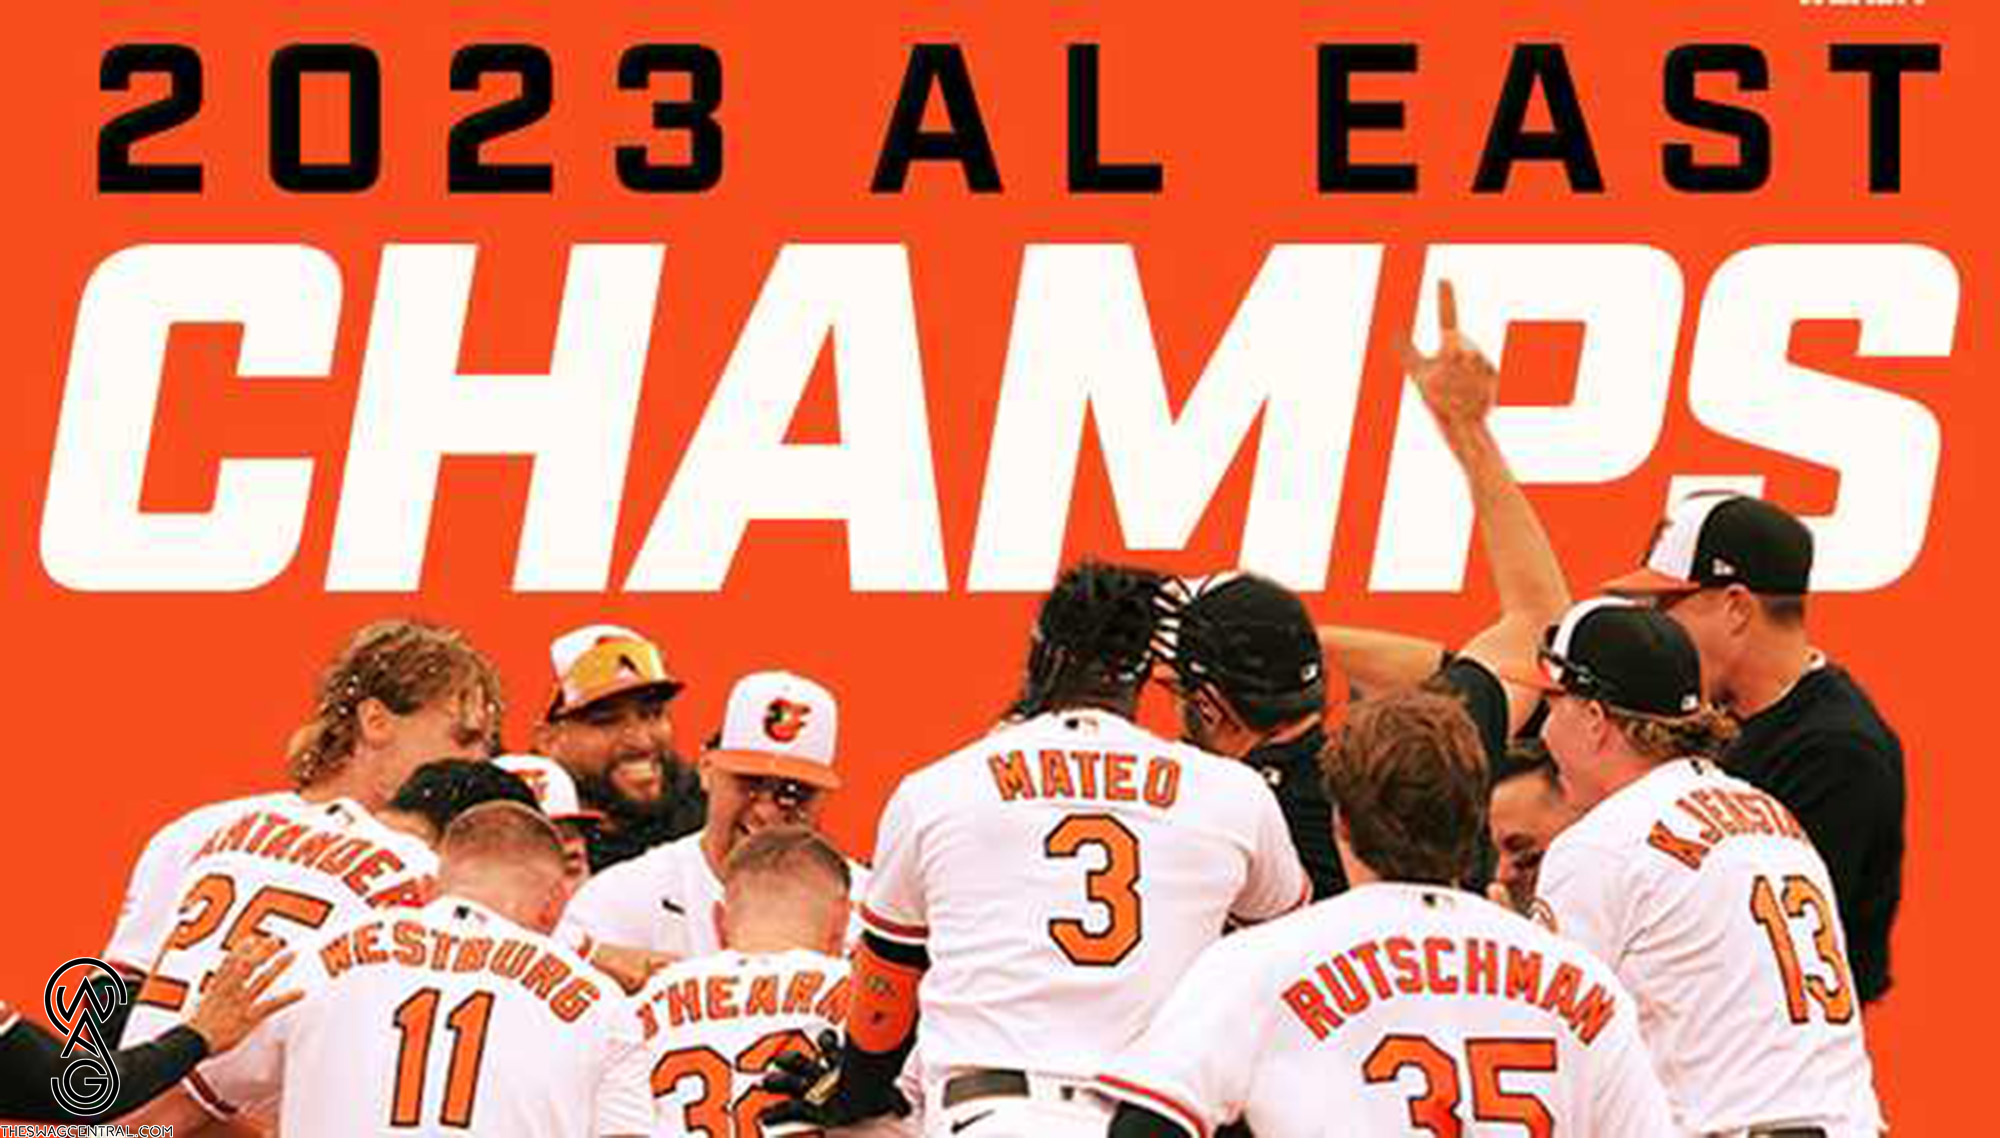 Celebrate Victory in Style Orioles Hoodie Giveaway 2023 and Baltimore Orioles 2023 AL East Division Champions Shirt